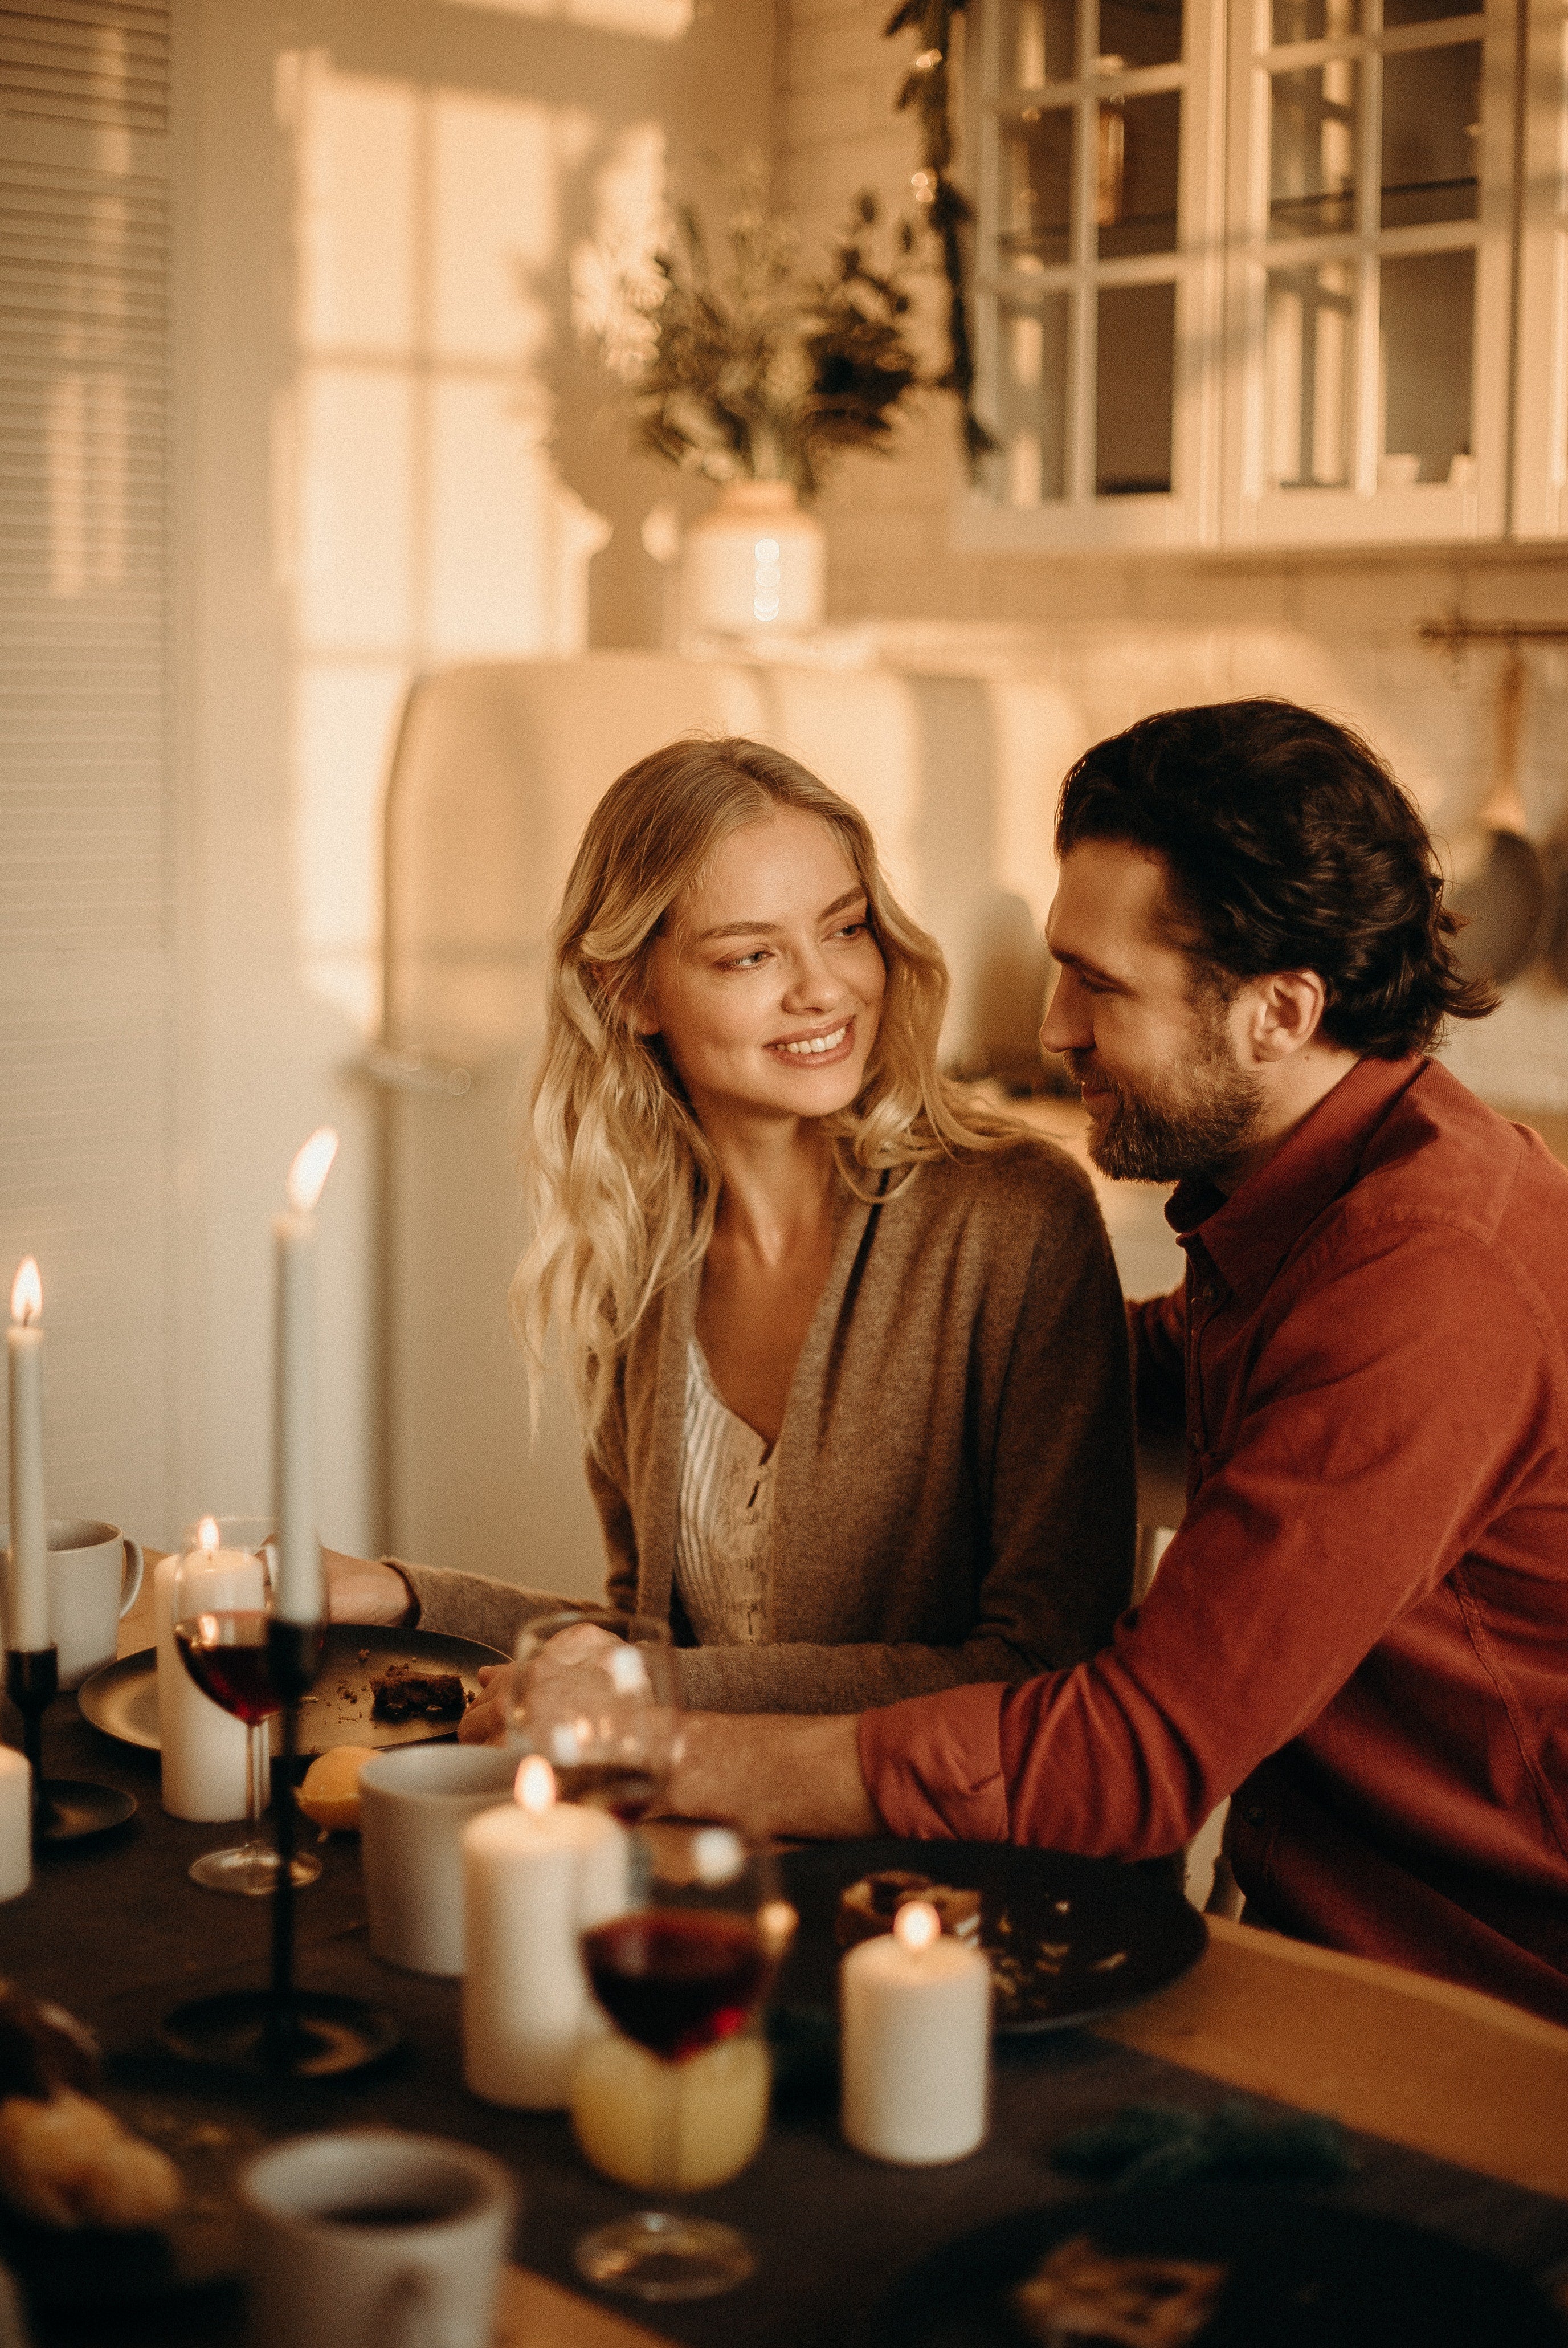 Celebrating Valentine's Day without electricity: Creative ideas for couples in Cape Town